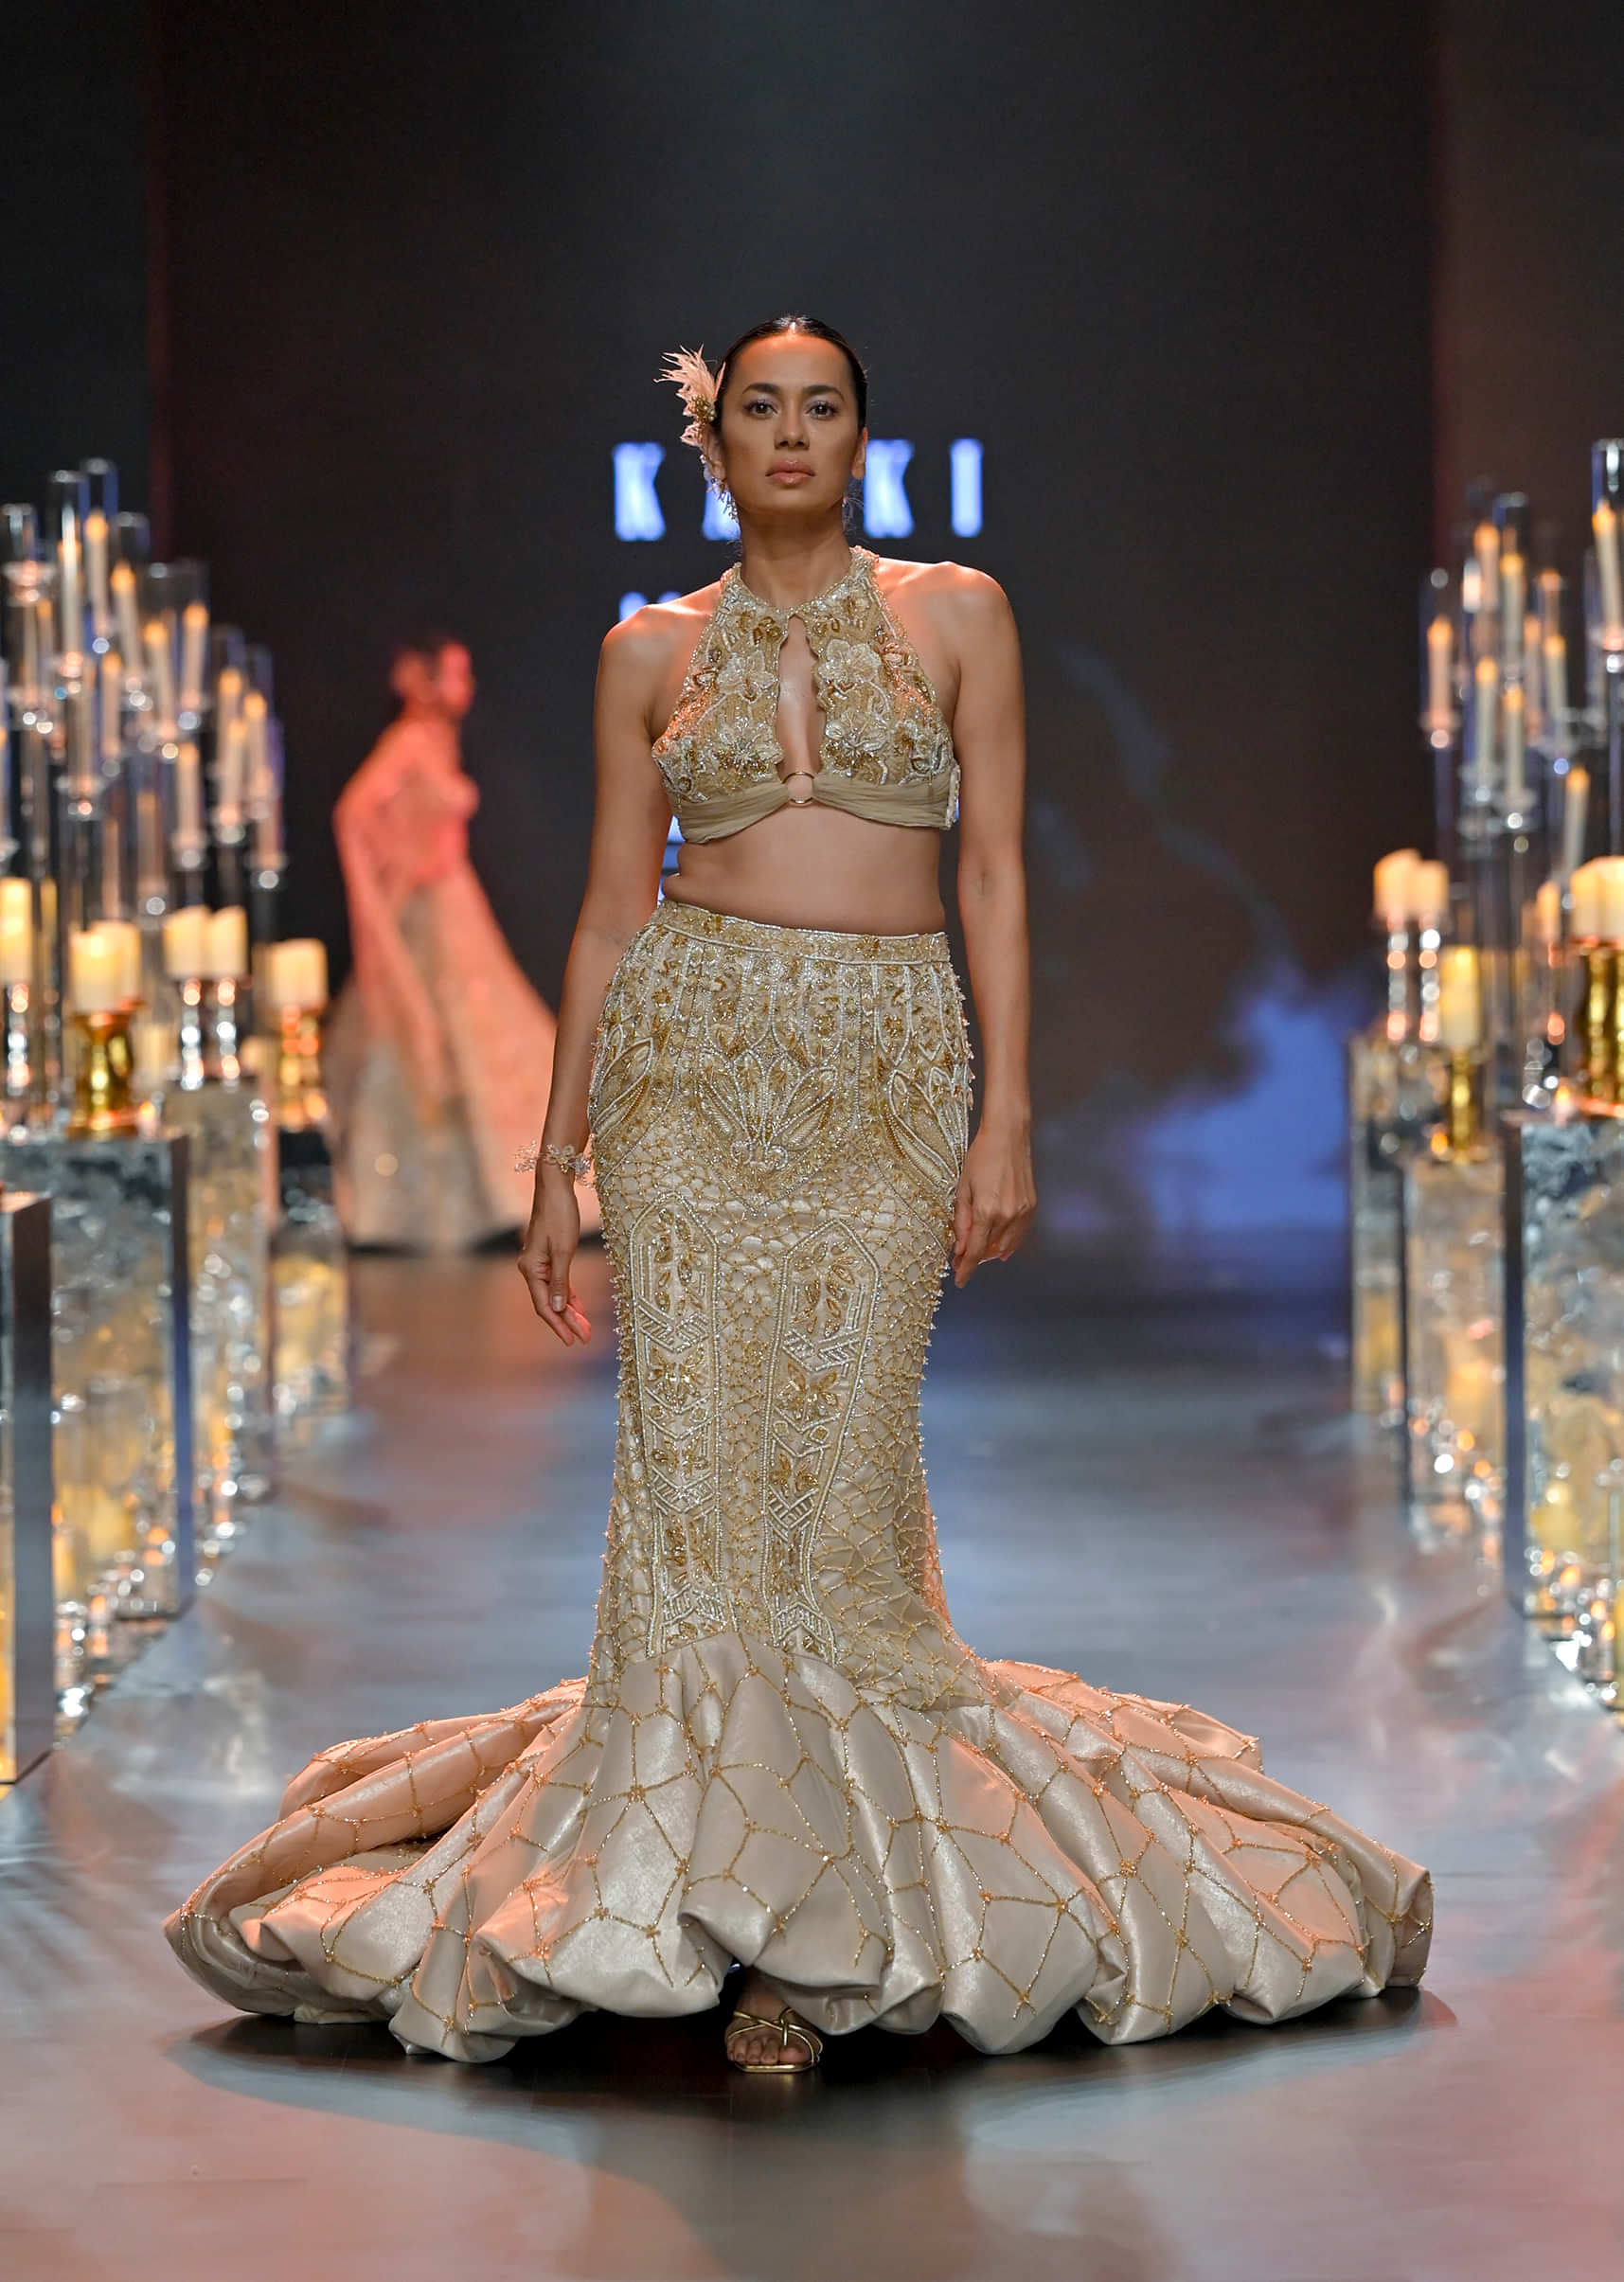 How to build your bridal trousseau with designer brands for saris, lehengas  and more, Vogue Wedding Show - The Virtual Edit 2021